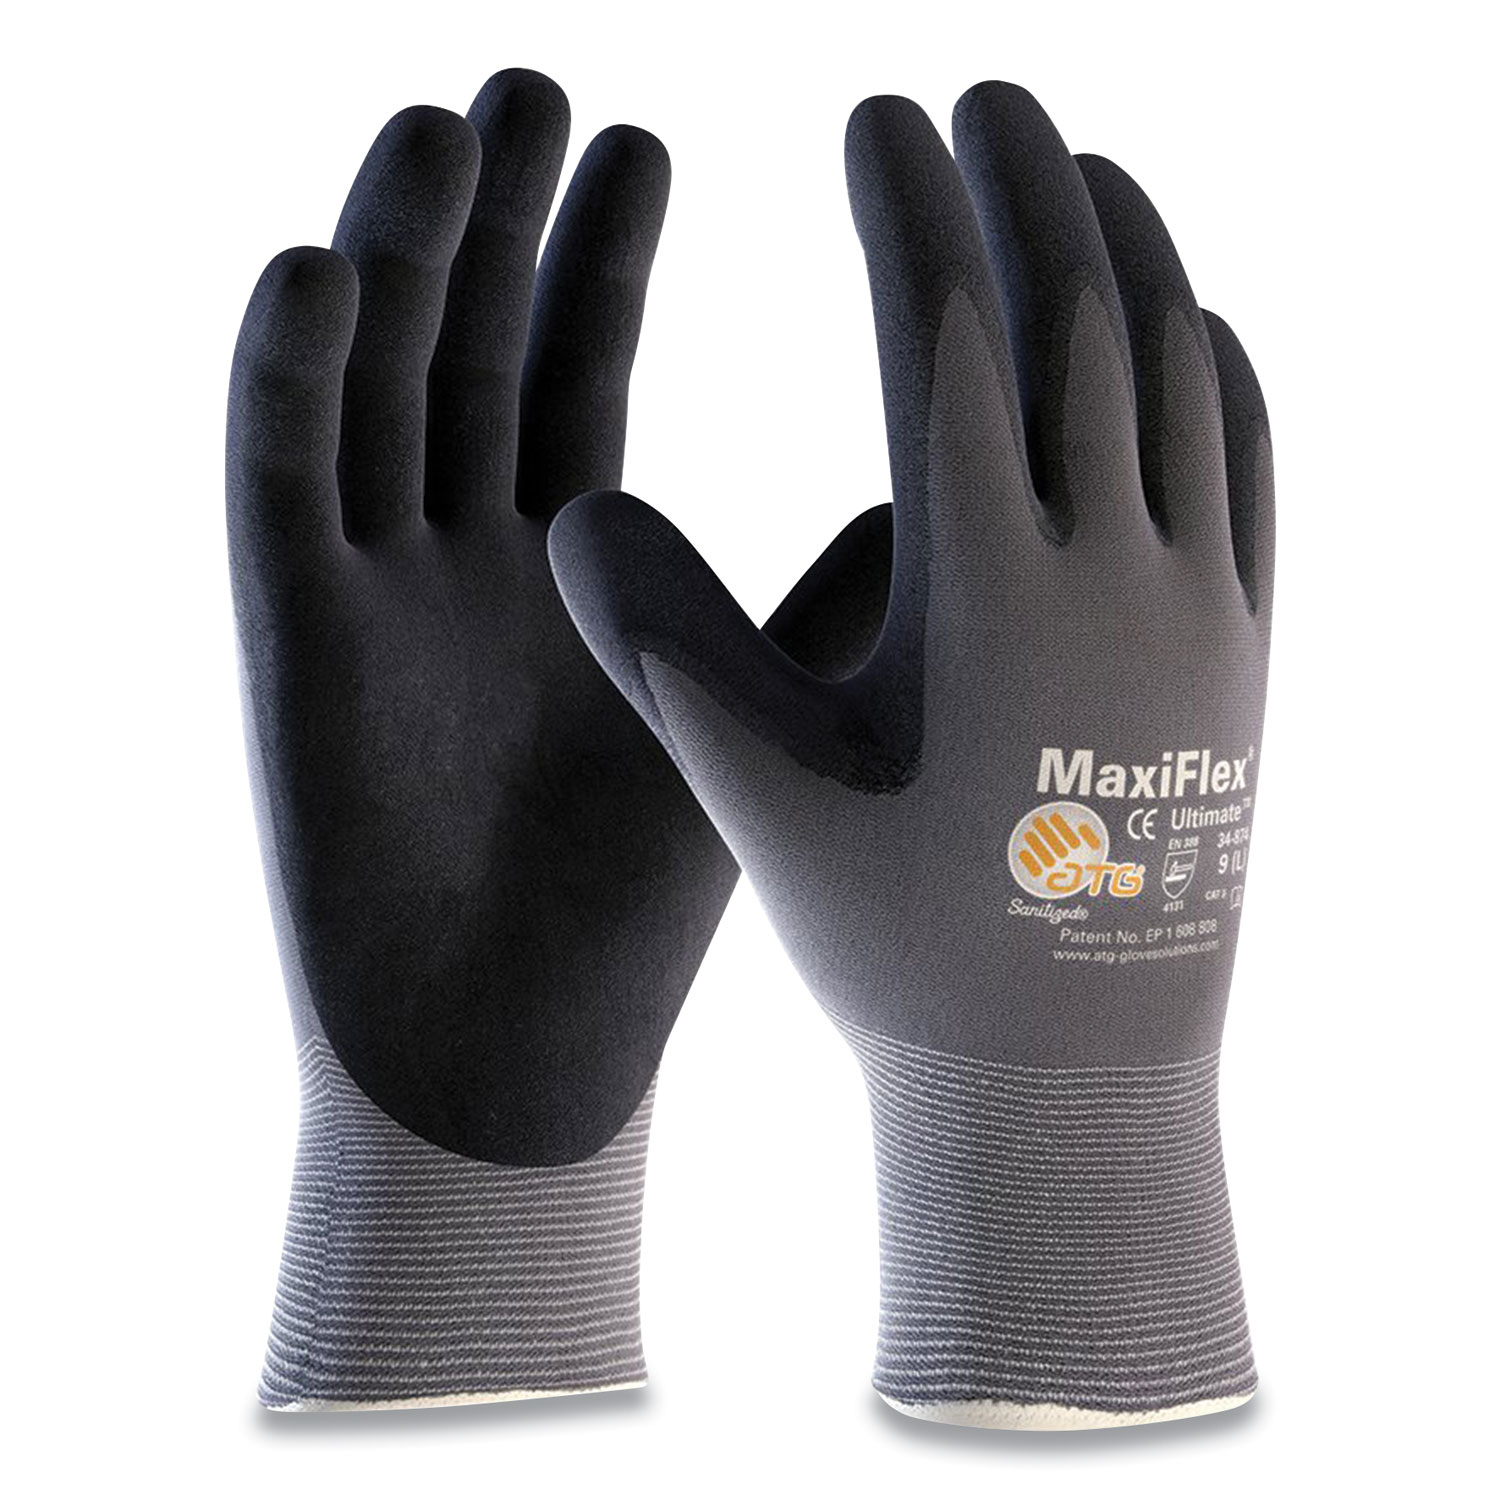 MaxiFlex® Ultimate Seamless Knit Nylon Gloves, Nitrile Coated MicroFoam Grip on Palm and Fingers, Medium, Gray, 12 Pairs